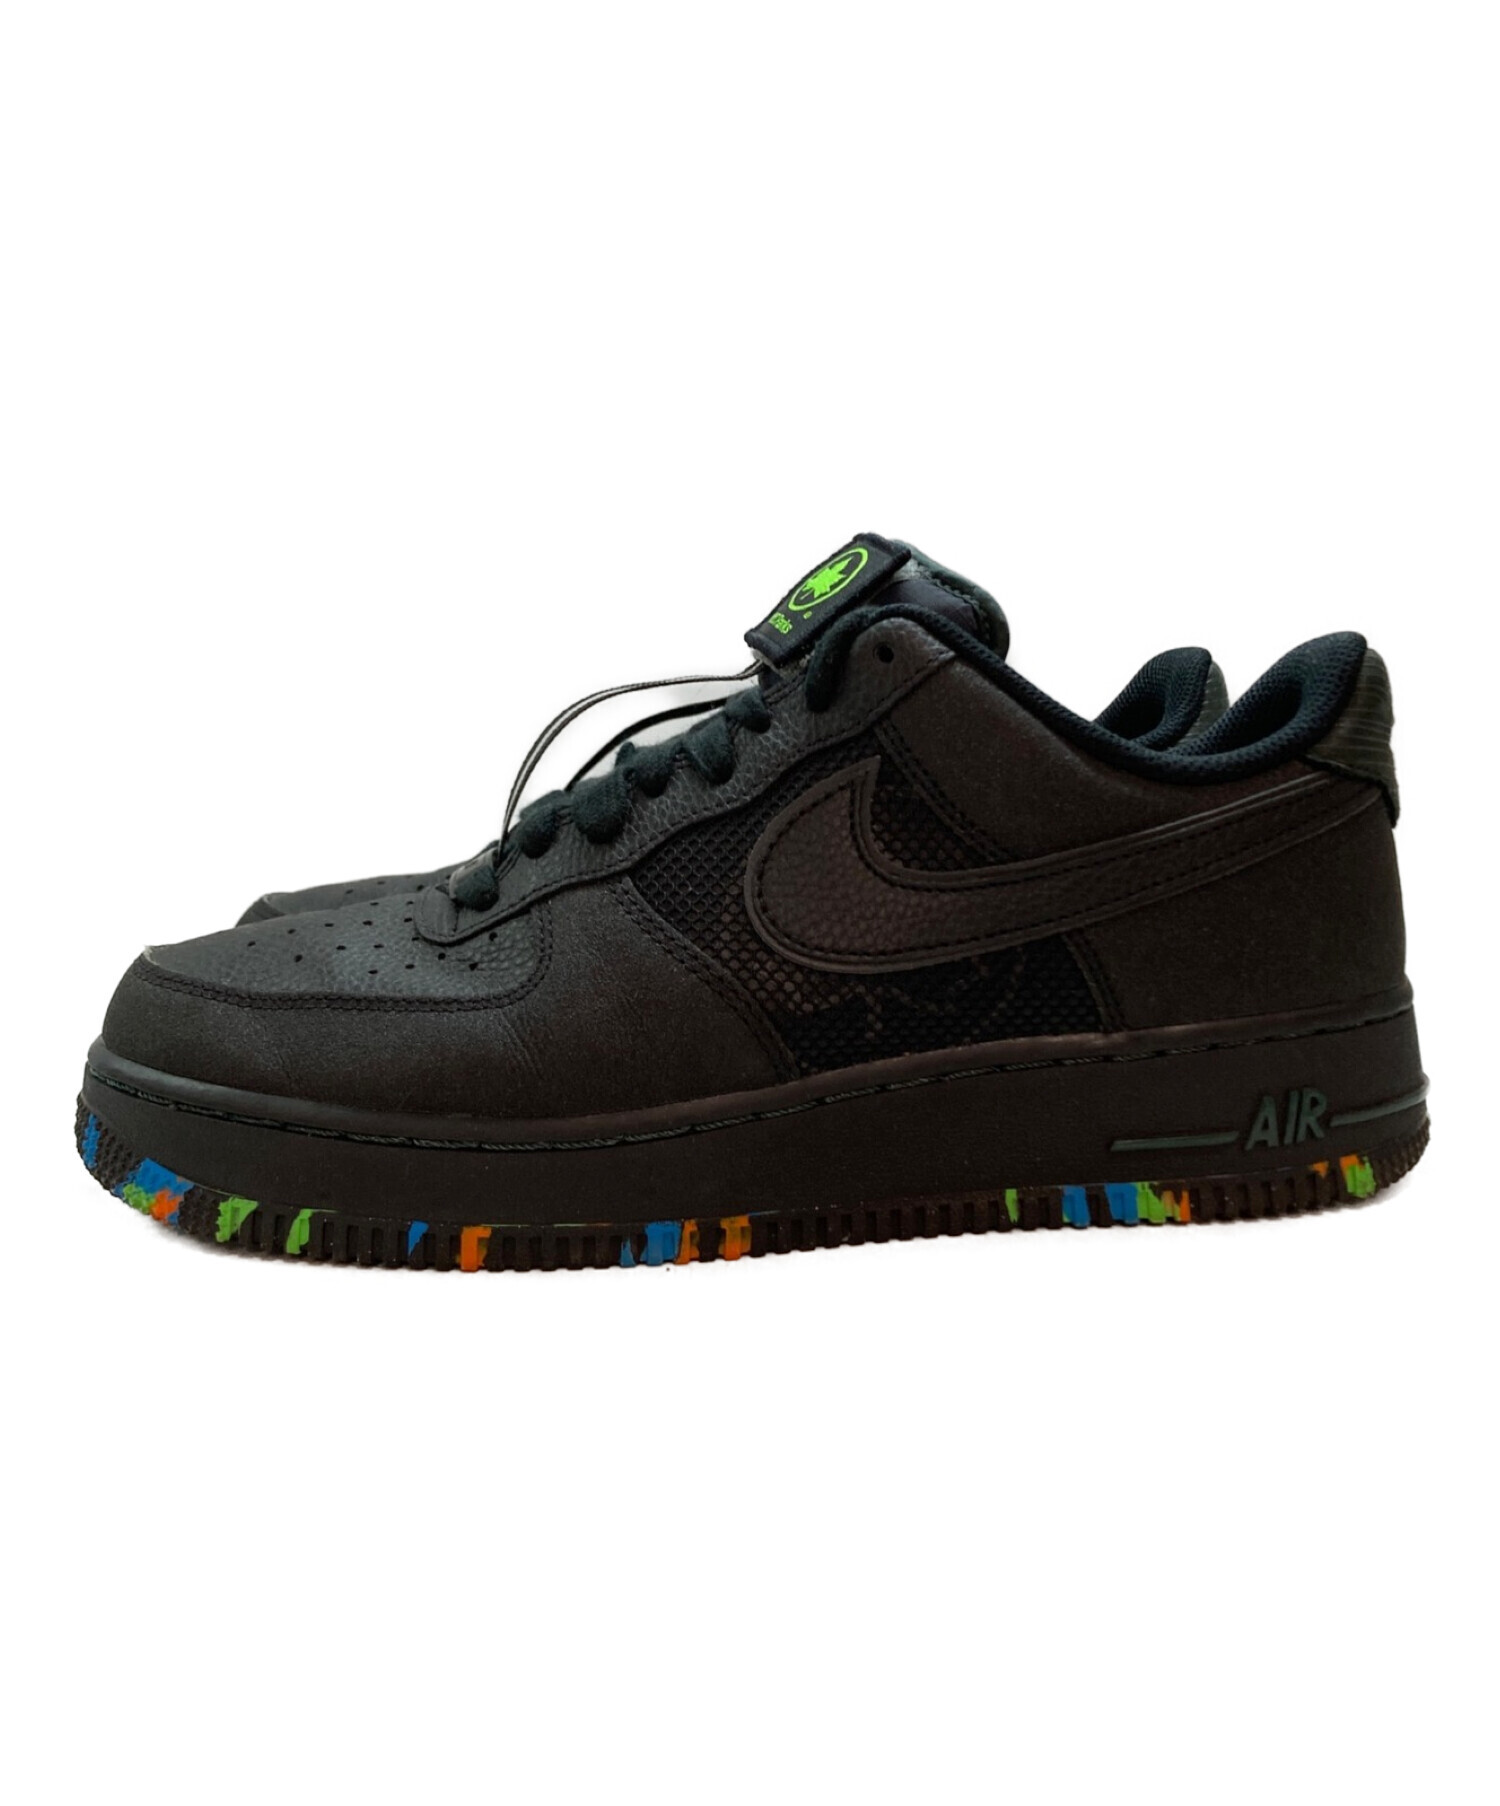 NIKE (ナイキ) AIR FORCE 1 LOW NYC PARKS ブラック サイズ:SIZE 26.5cm